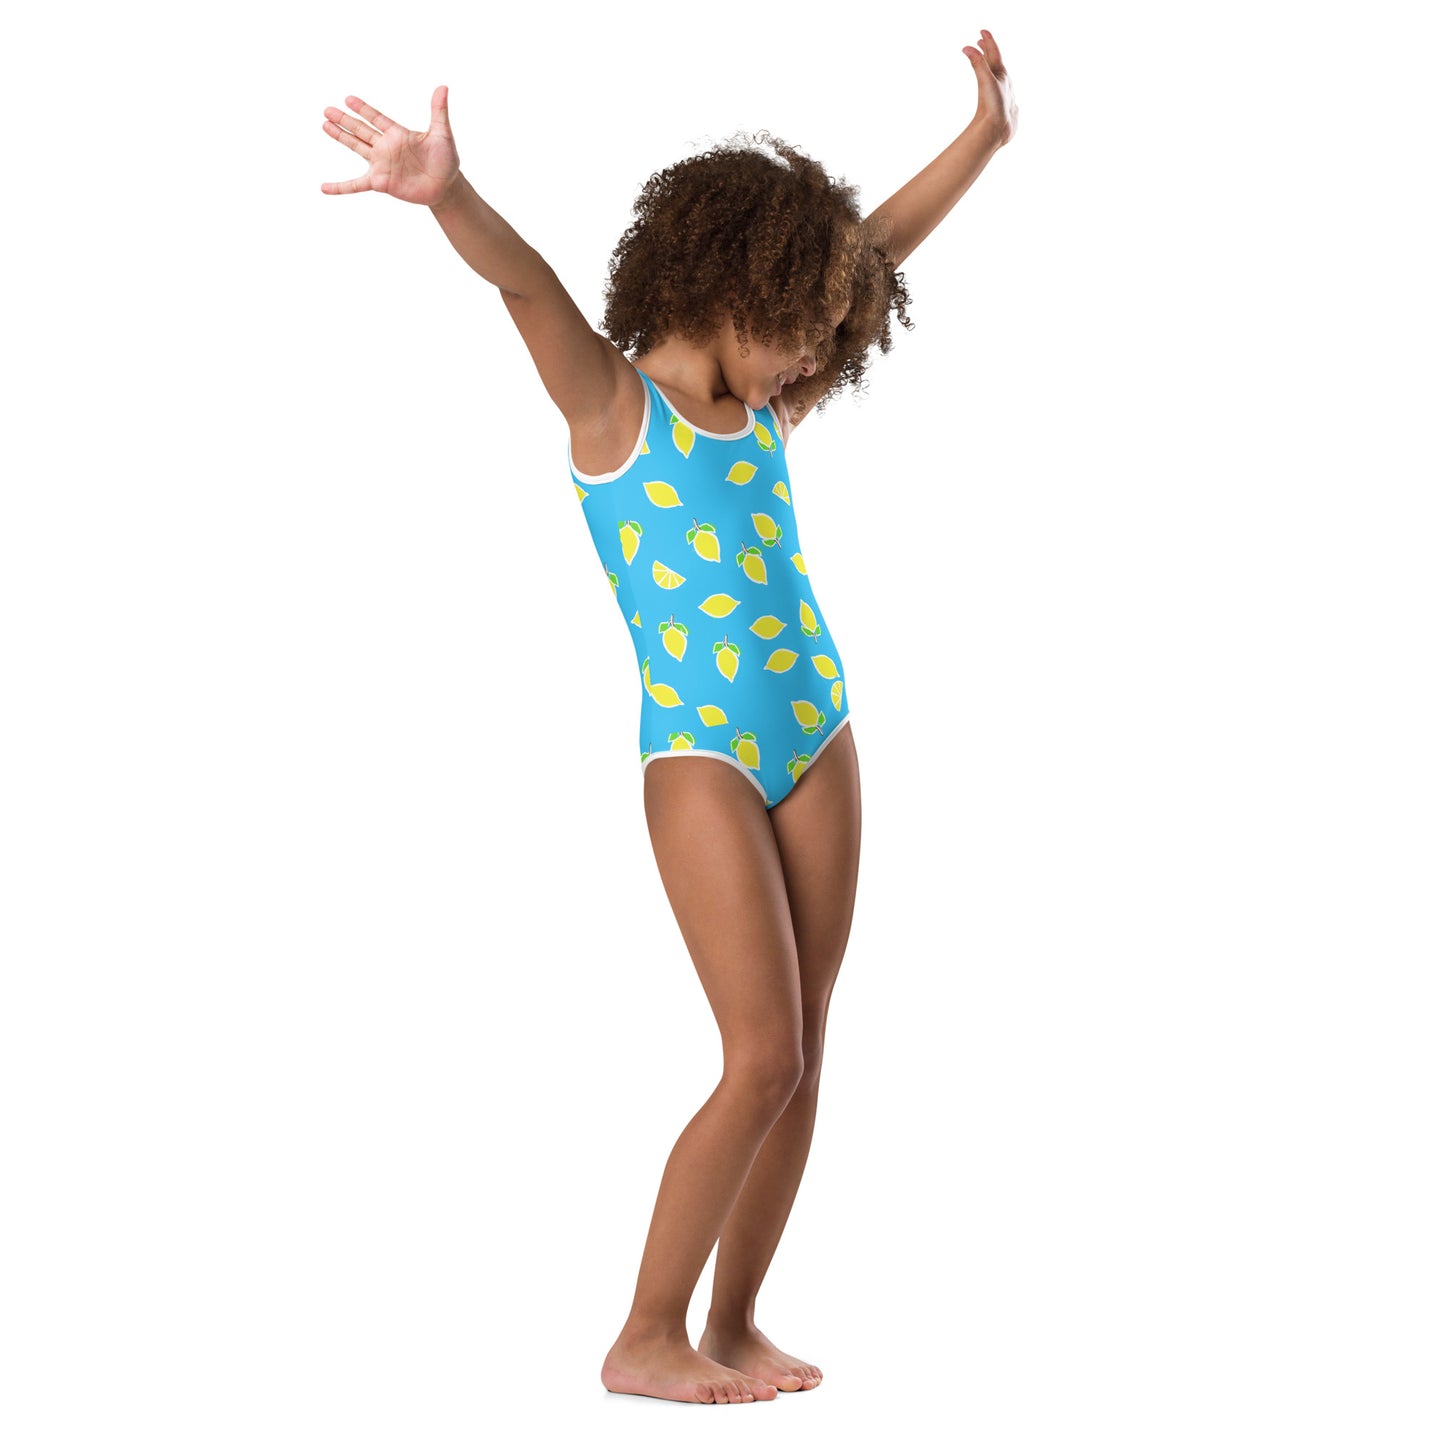 Girls' Athletic Swimsuit One Piece blue with lemons (Kids 2T-7) FREE SHIPPING